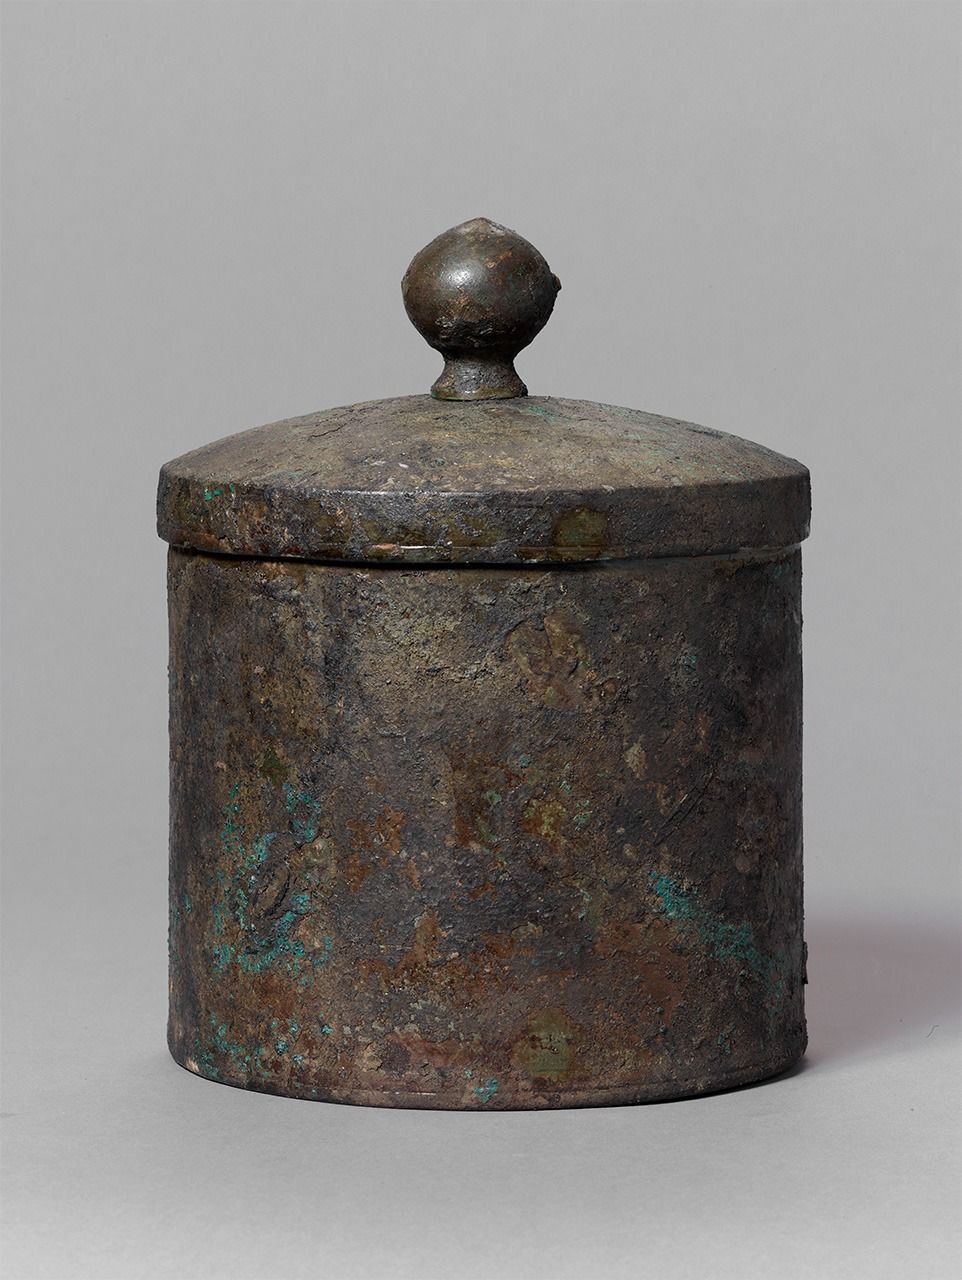 A copper sutra container excavated from the sutra mound. These containers were used to preserve Buddhist sutras, but apparently no sutra was found inside this container, perhaps because it had already eroded over the centuries. (Courtesy of the Kamakura Board of Education)